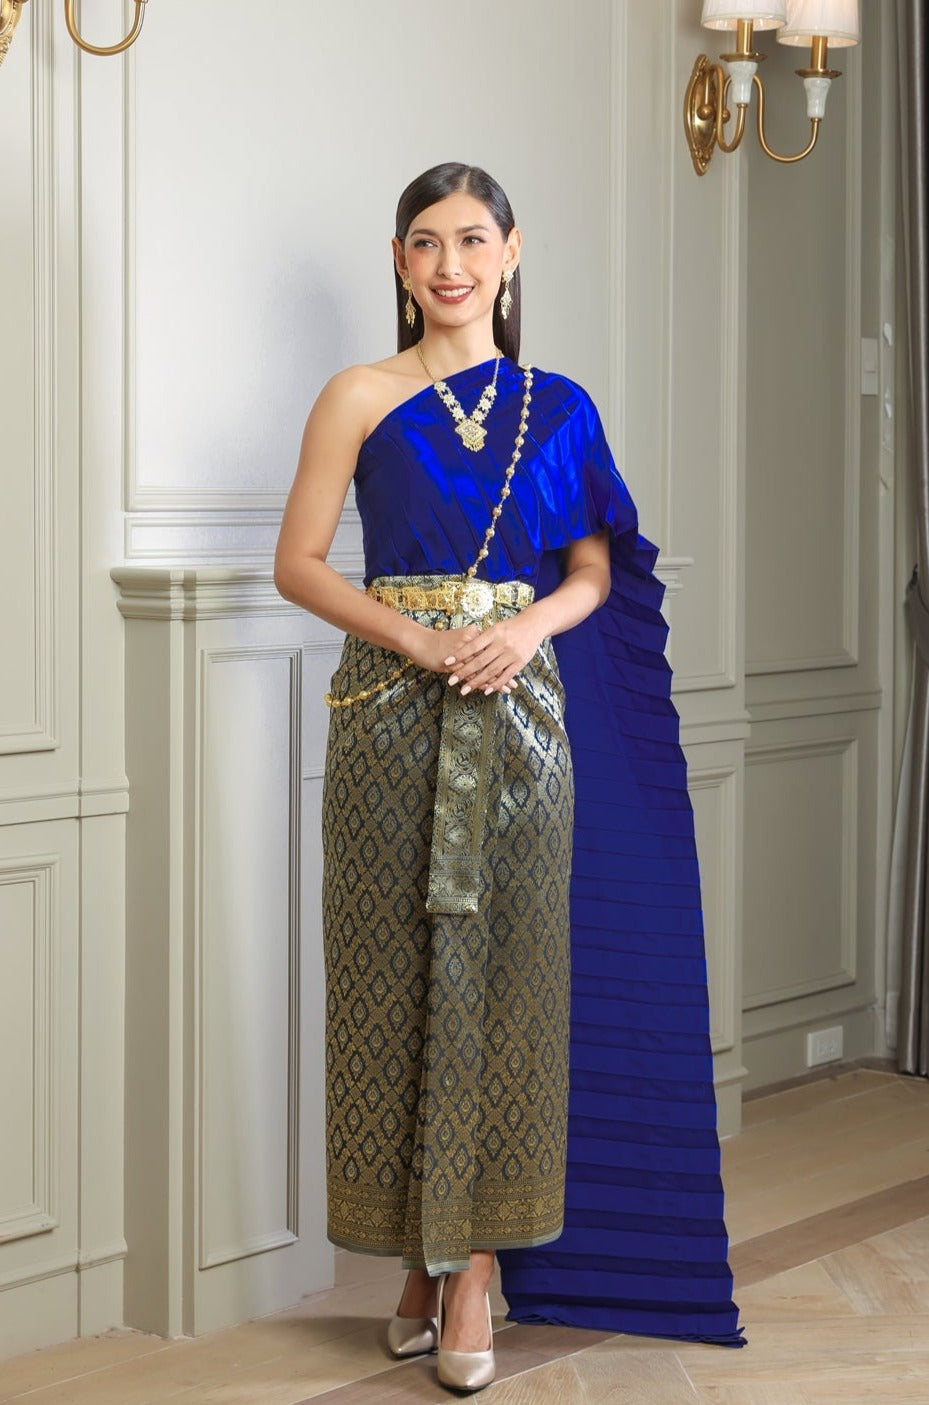 A woman wearing our royal blue traditional Thai dress.